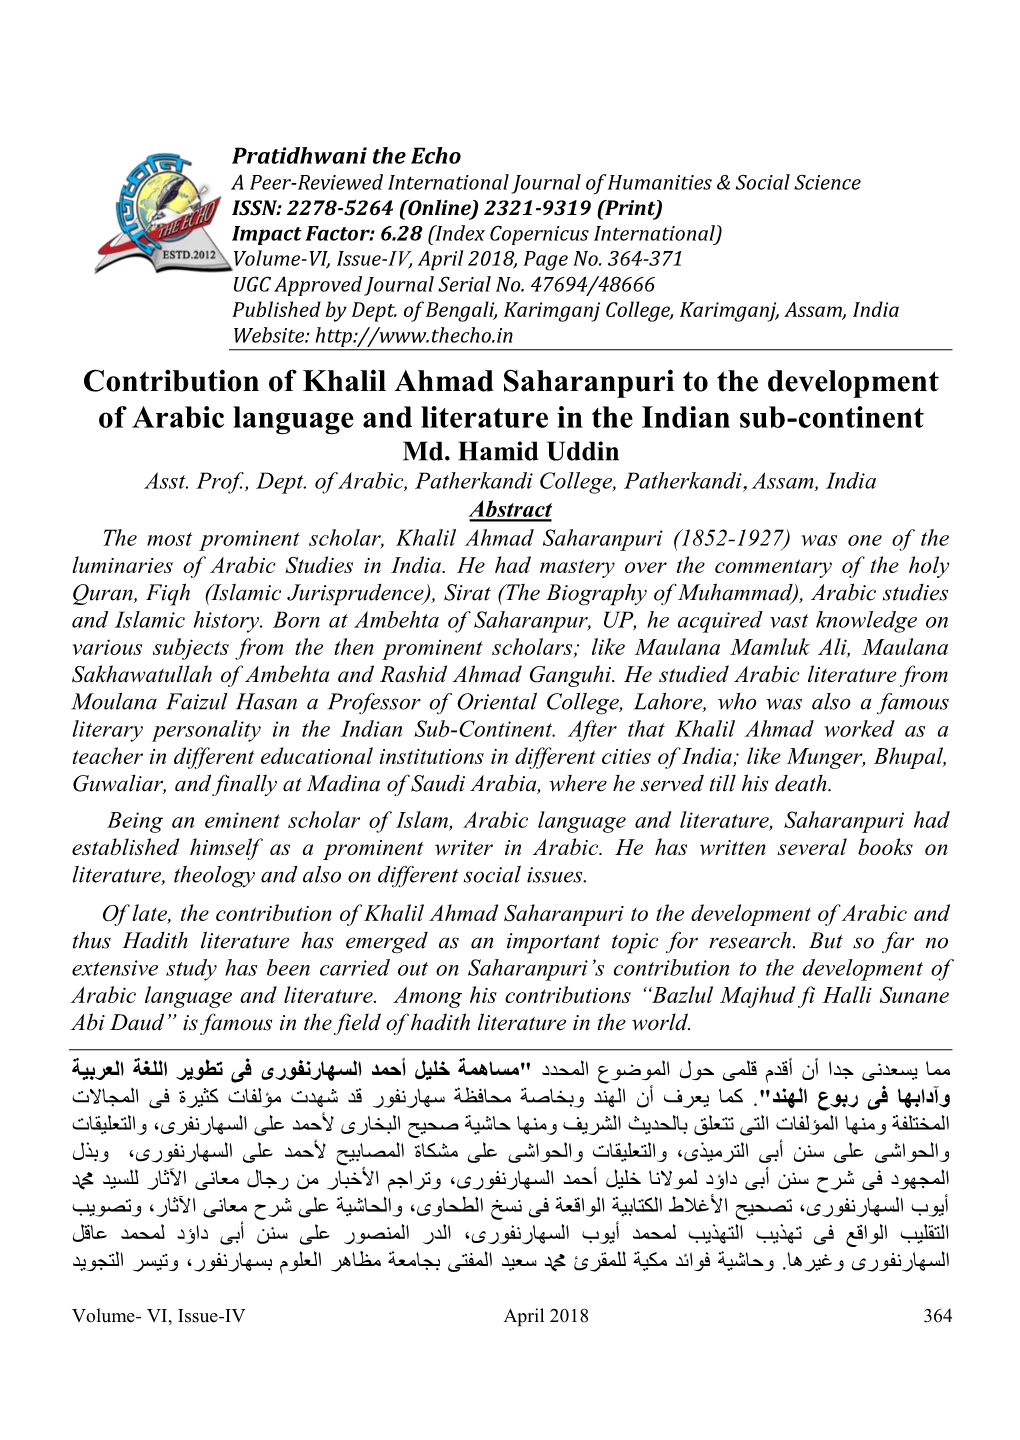 Contribution of Khalil Ahmad Saharanpuri to the Development of Arabic Language and Literature in the Indian Sub-Continent Md